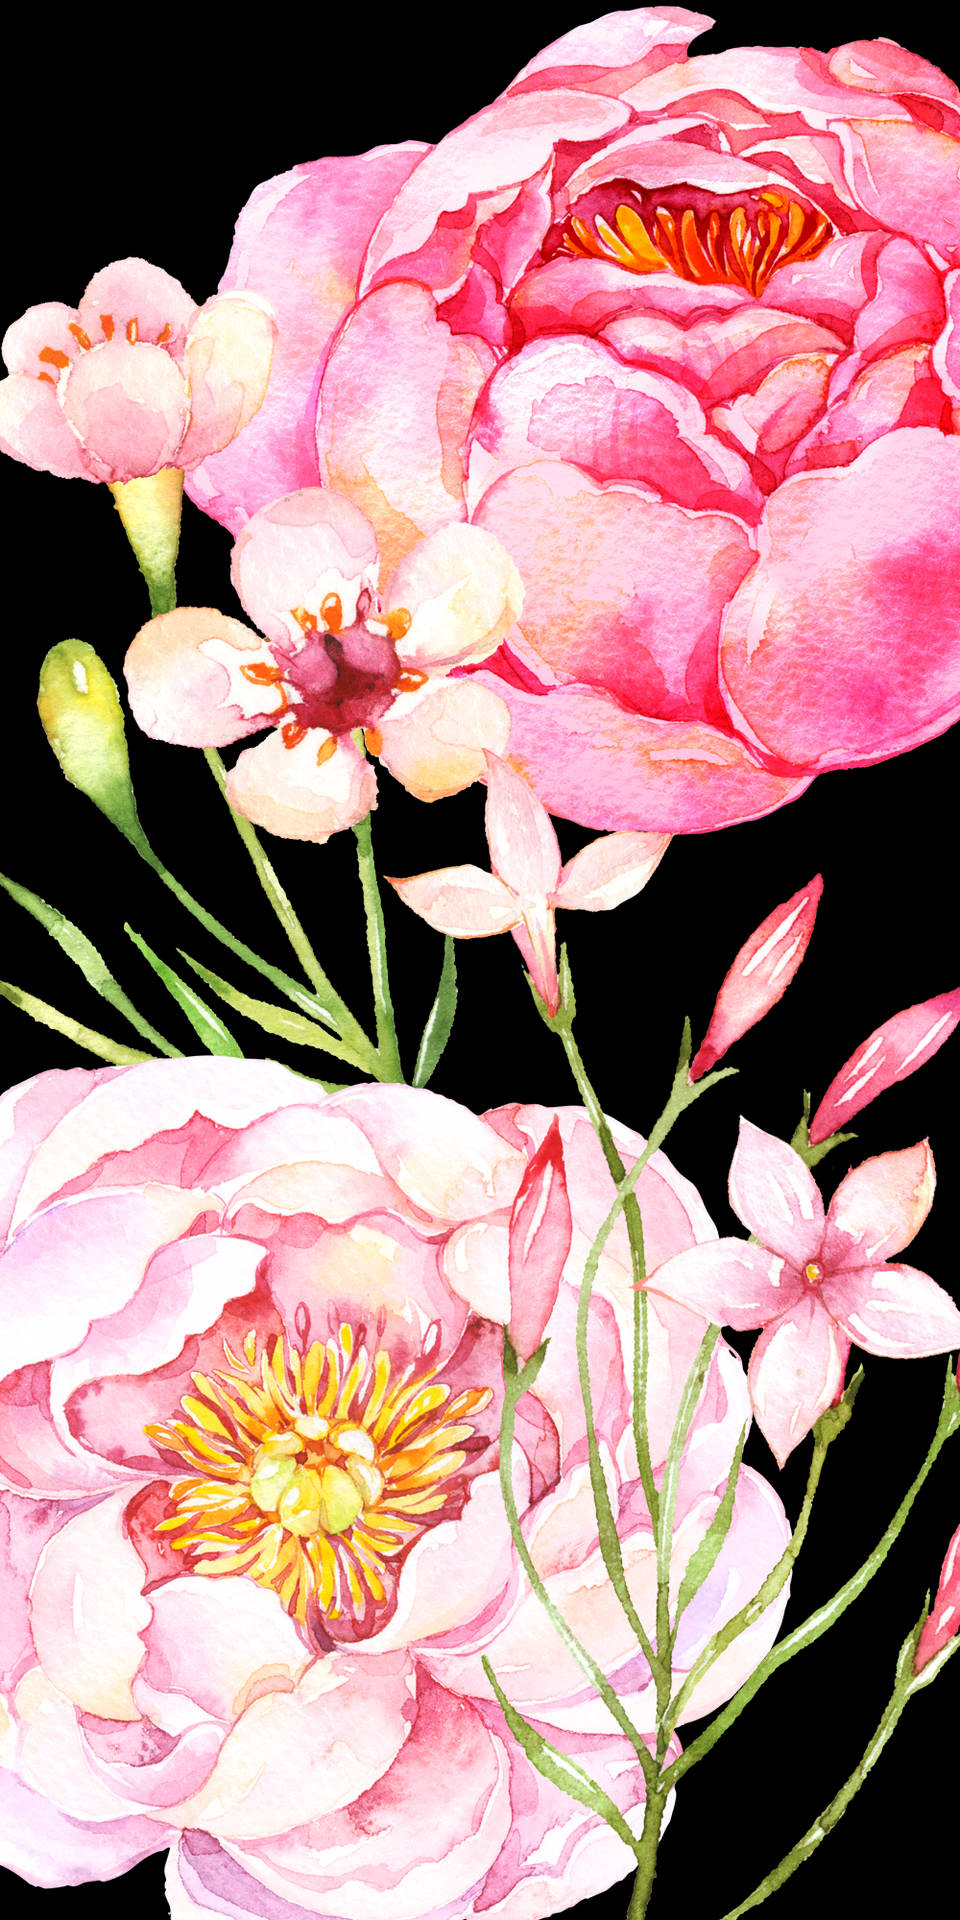 Cute Pink Flower Blooms Painting Background